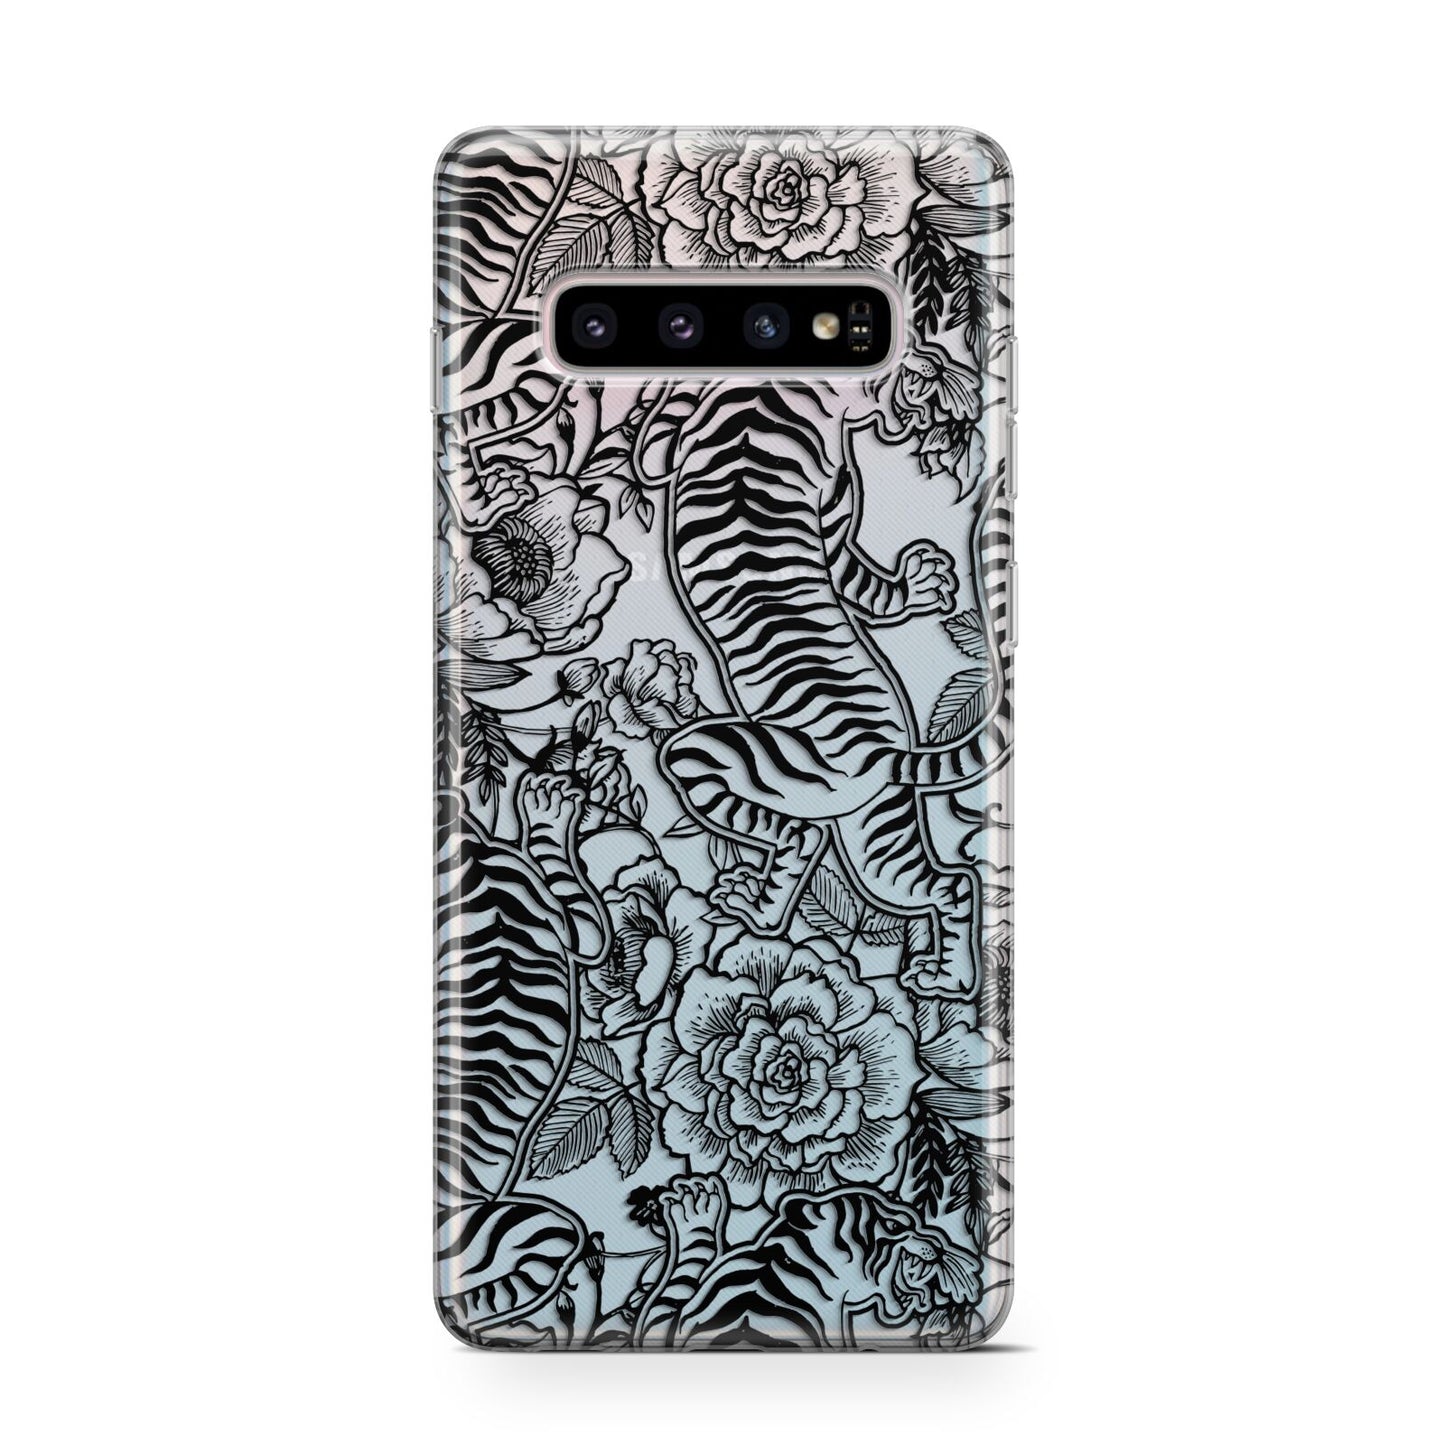 Chinese Tiger Samsung Galaxy S10 Case